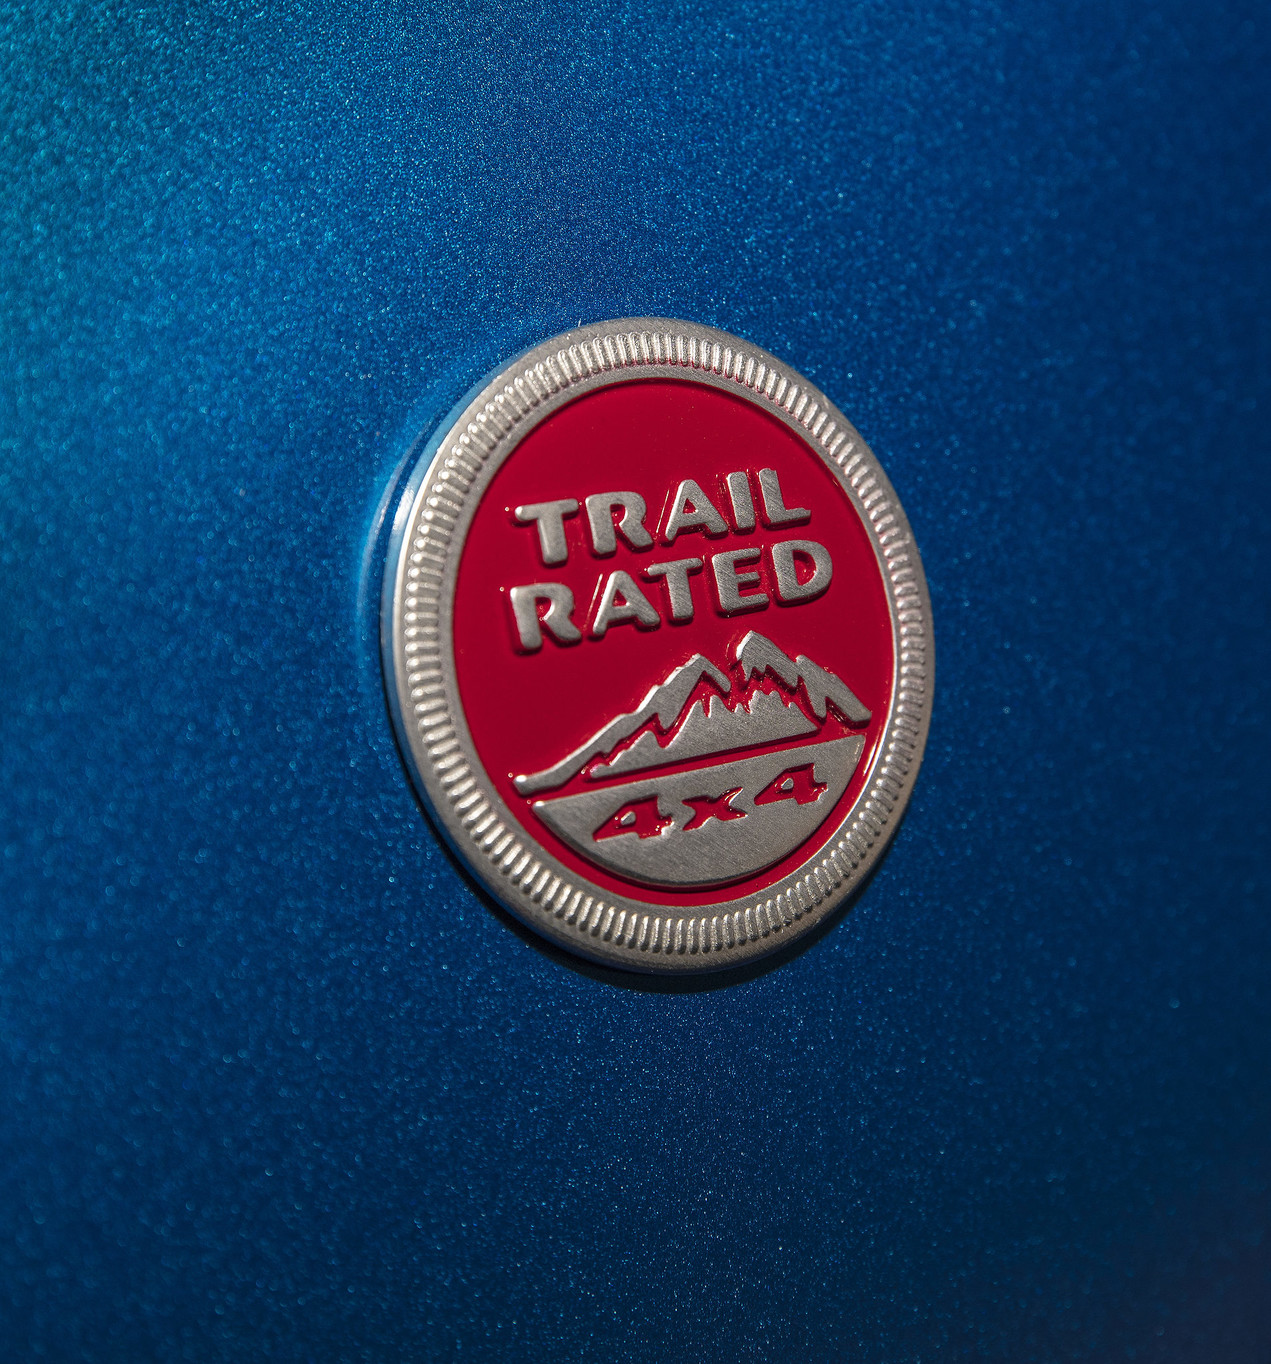 Trail Rated: The Ultimate Test of Capability